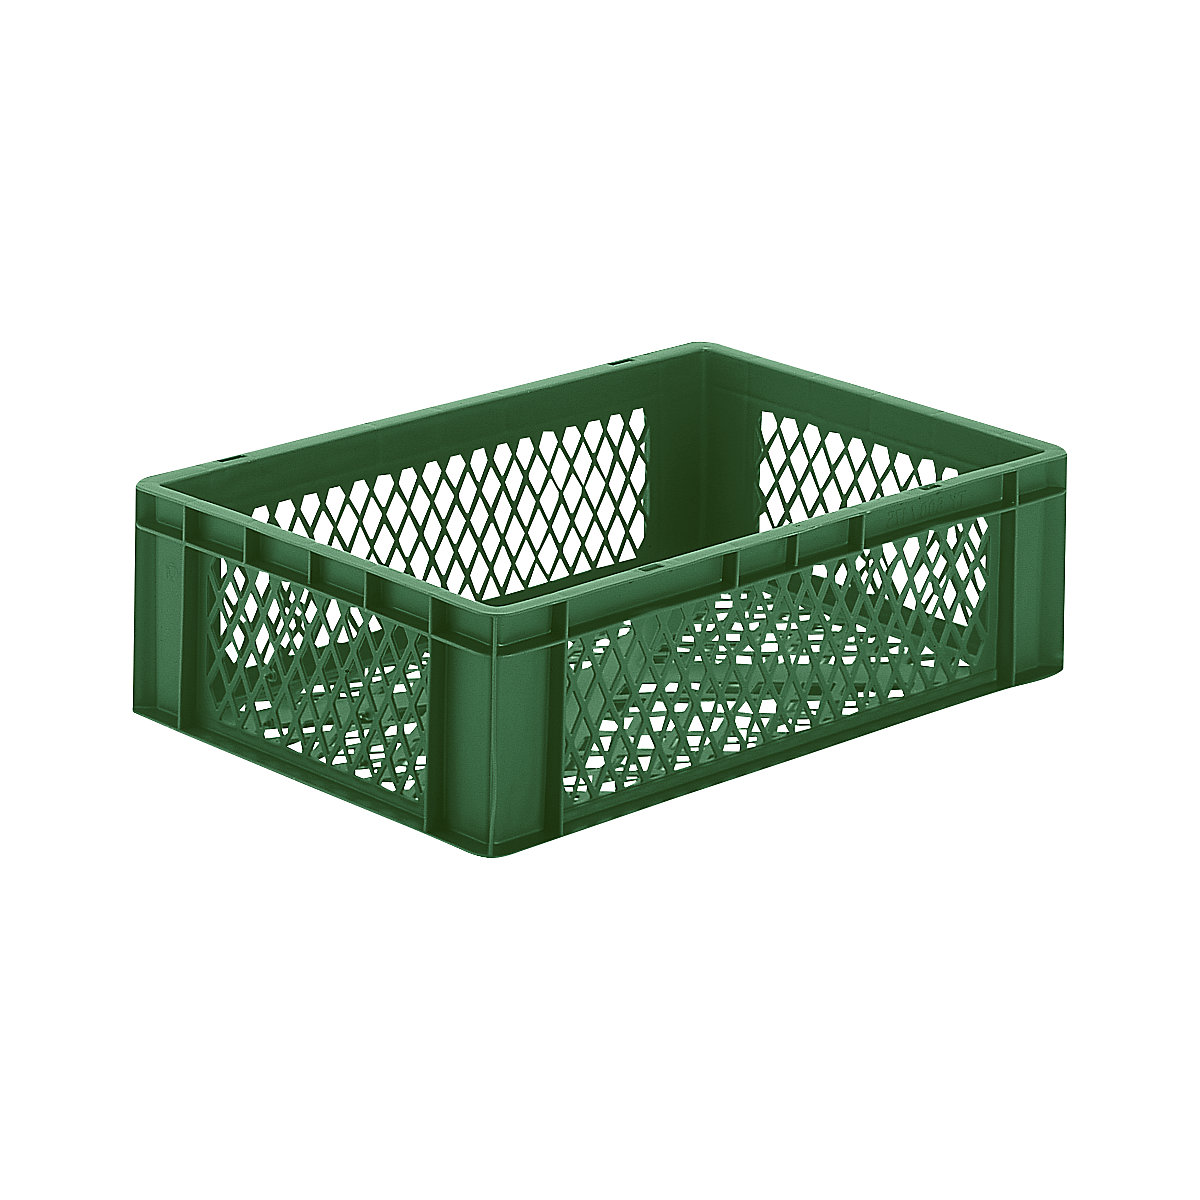 Euro stacking container, perforated walls and base, LxWxH 600 x 400 x 175 mm, green, pack of 5-7